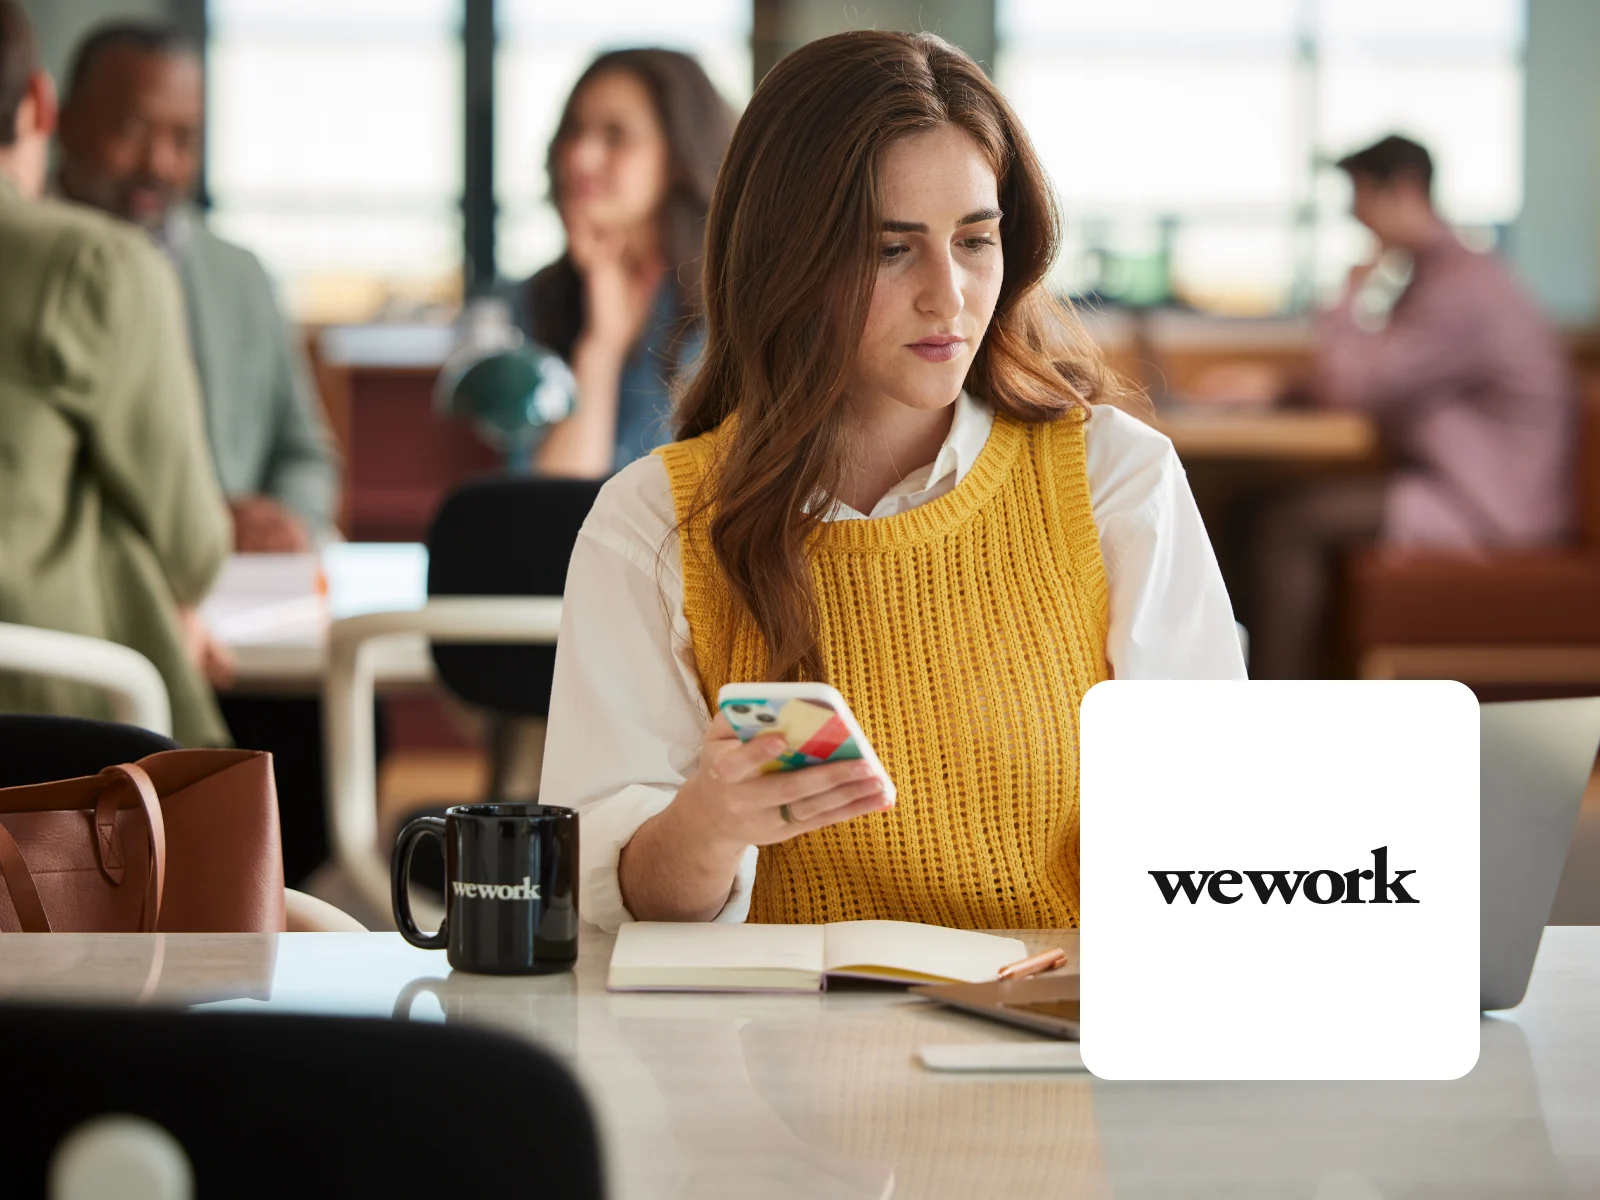 Decorative: Image of woman working at WeWork